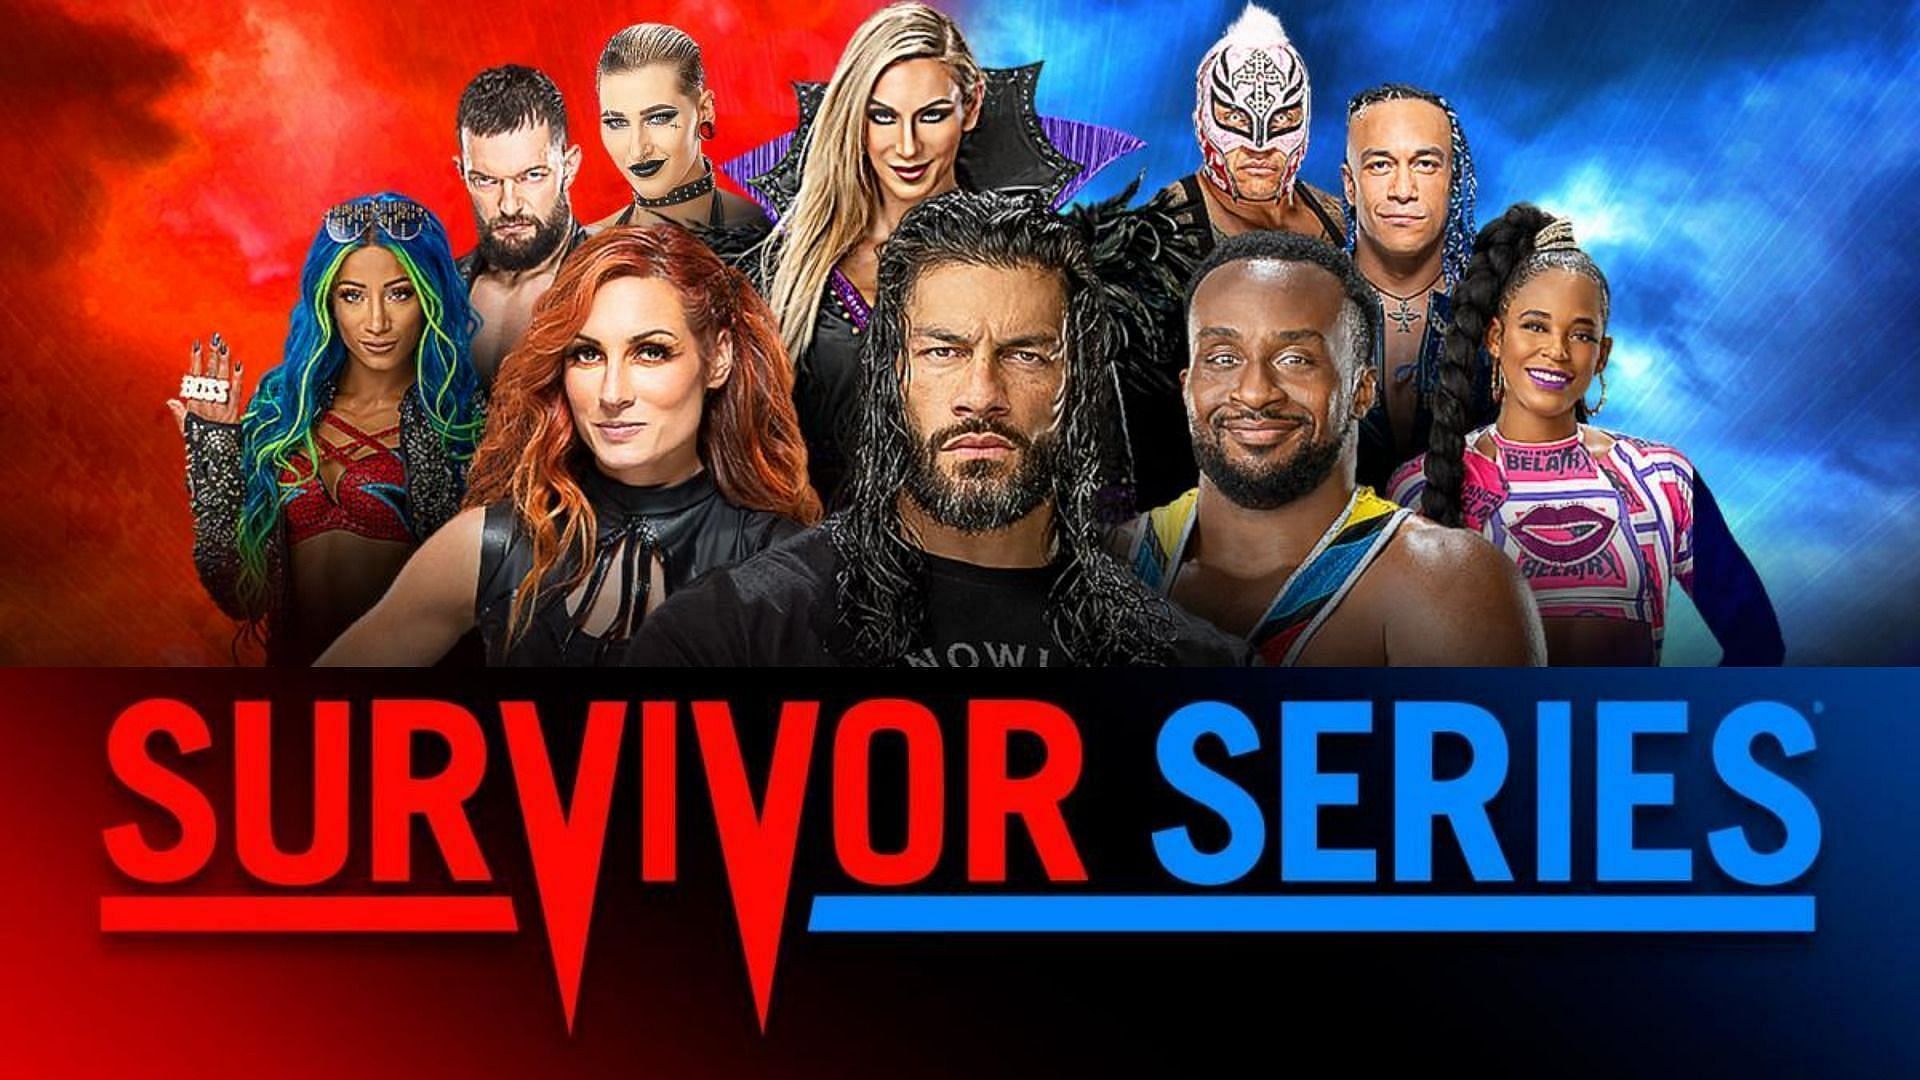 Survivor Series is just around the corner as RAW and SmackDown prepare for brand warfare